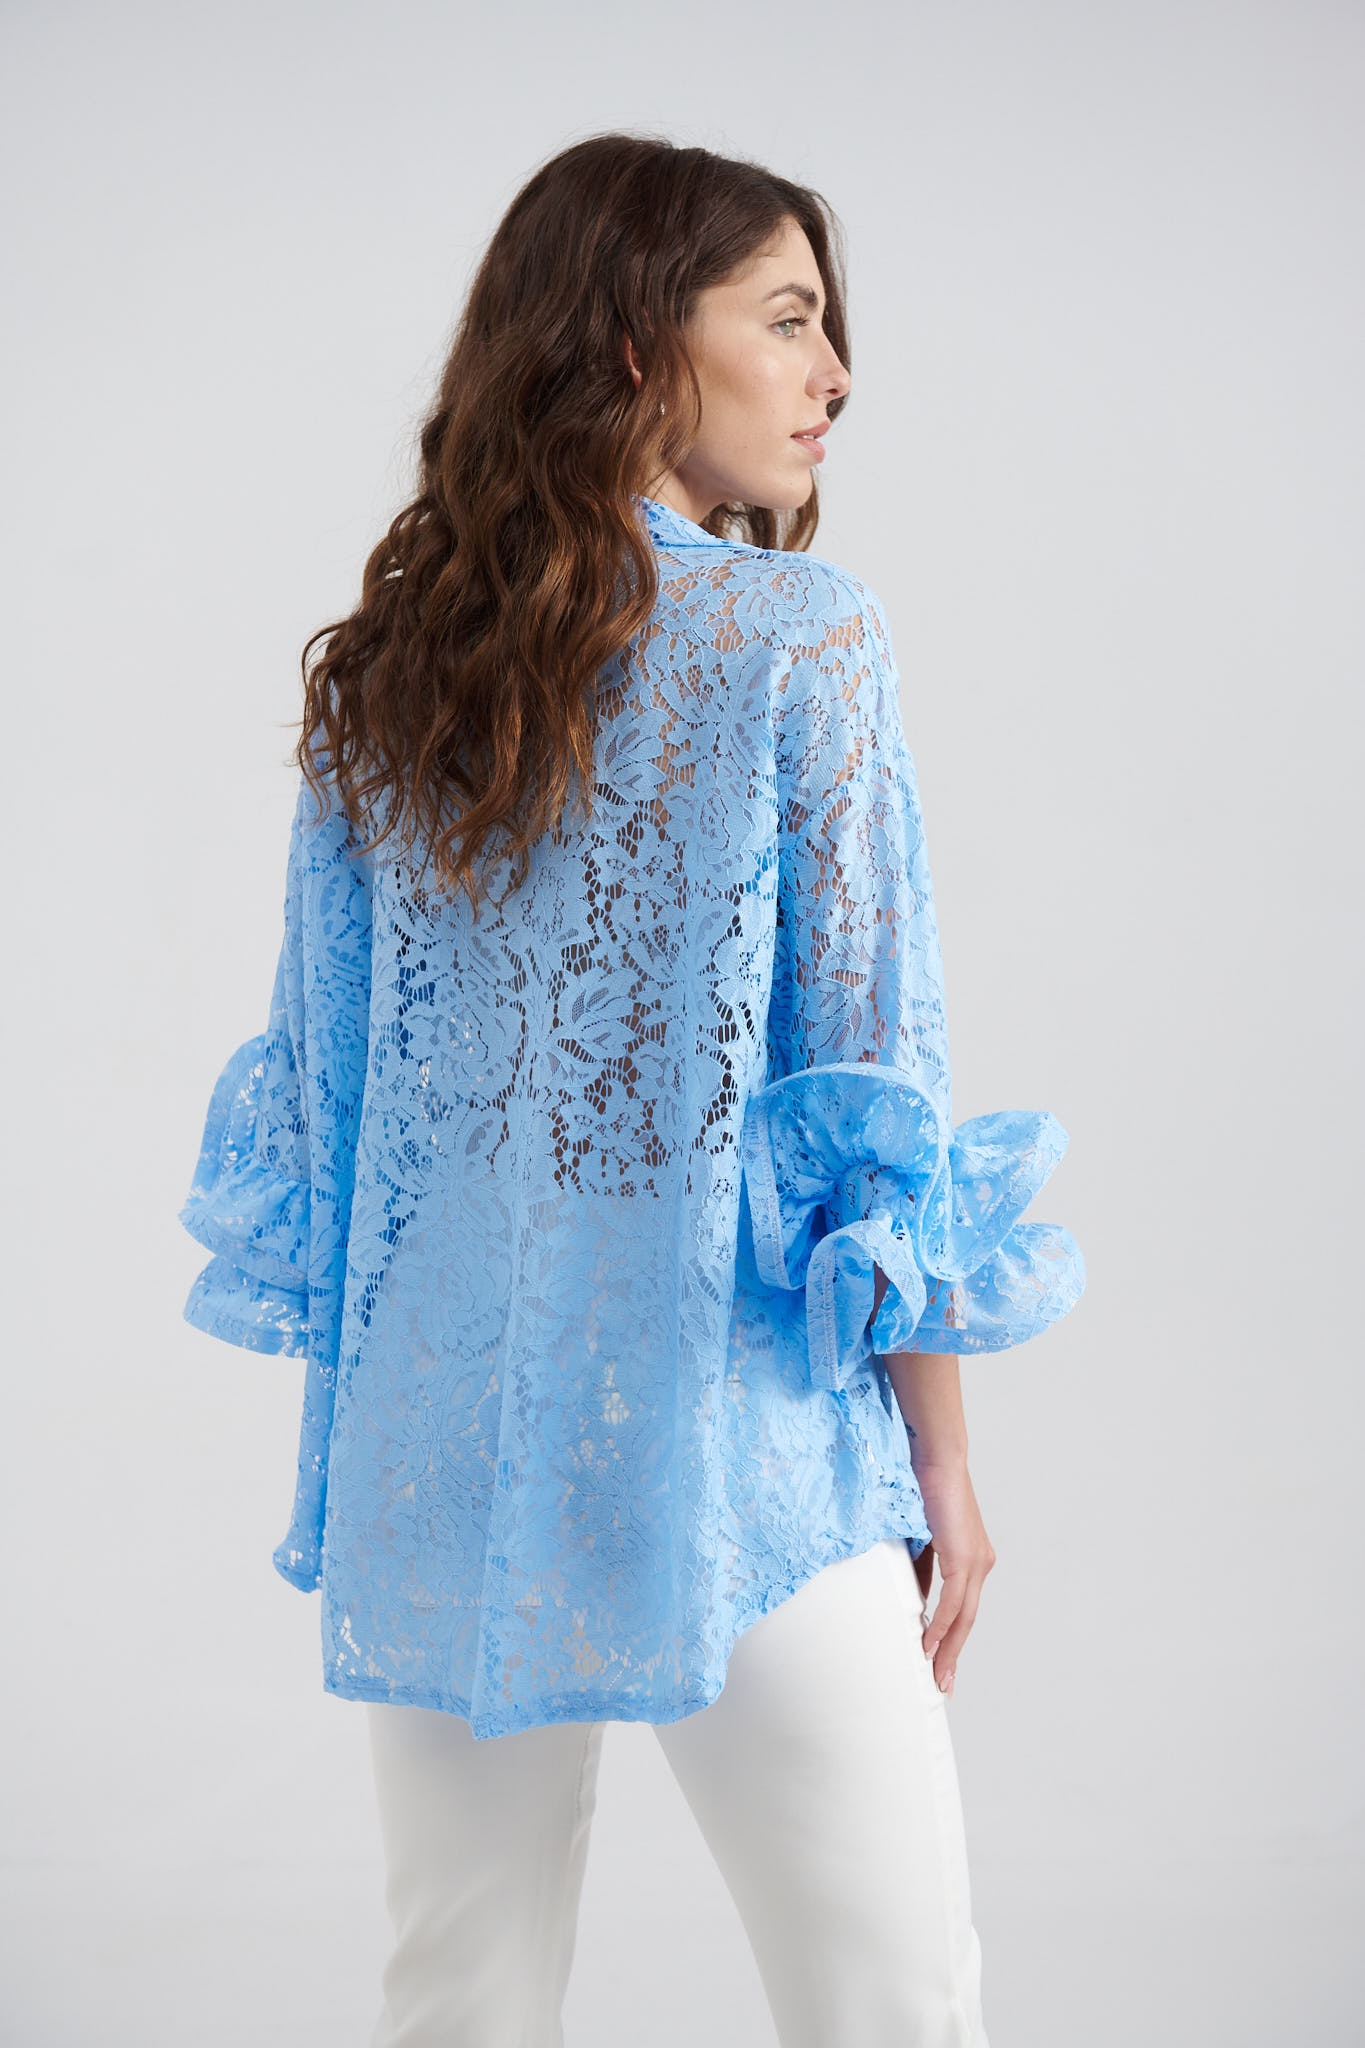 Lacy Shirt With Ruffles